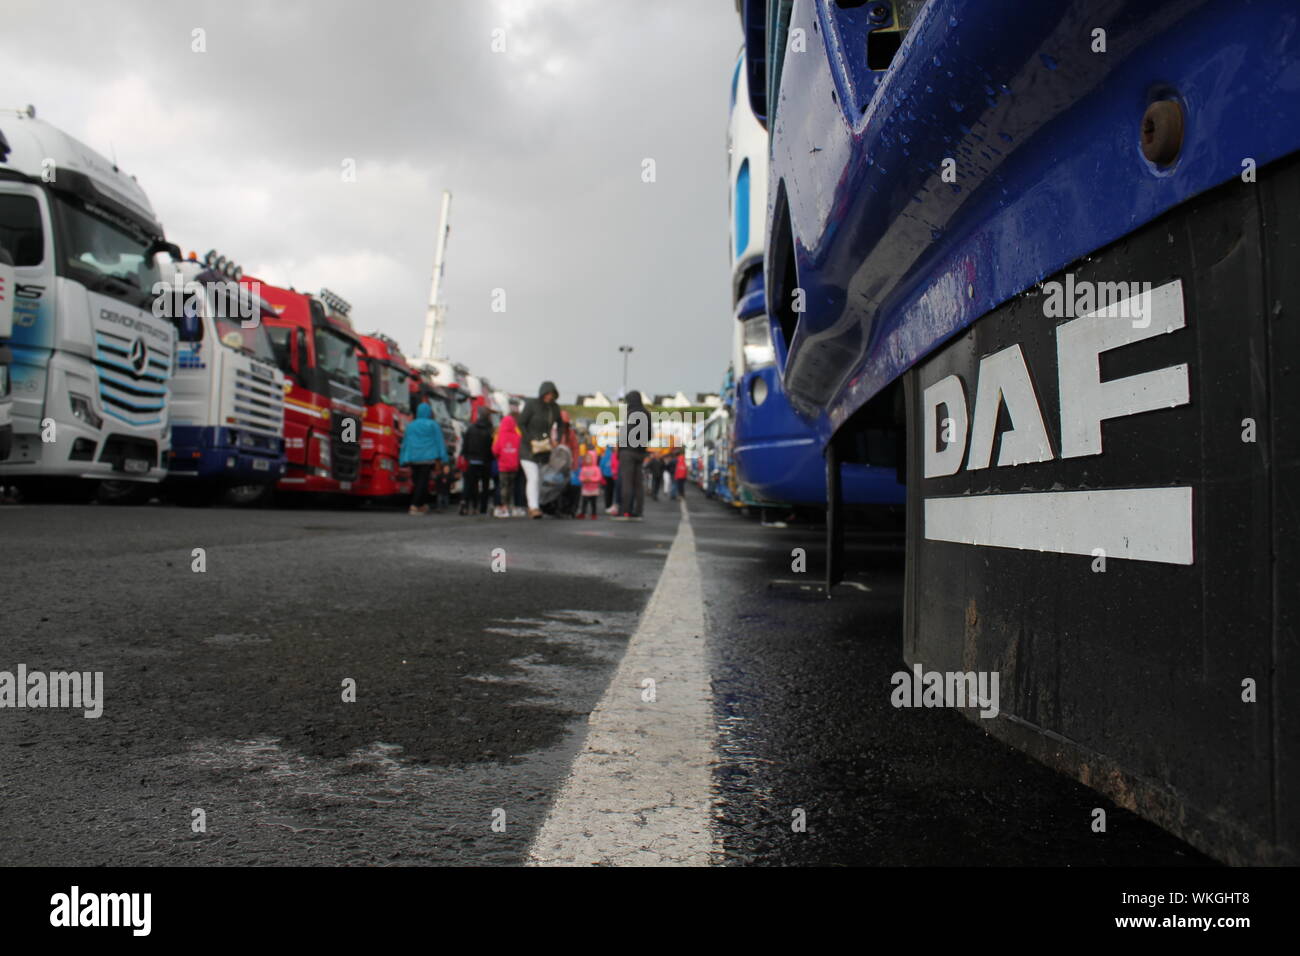 A DAF mudguard with other lorries in the background seen at Causeway Coast Truckfest 2019 Stock Photo